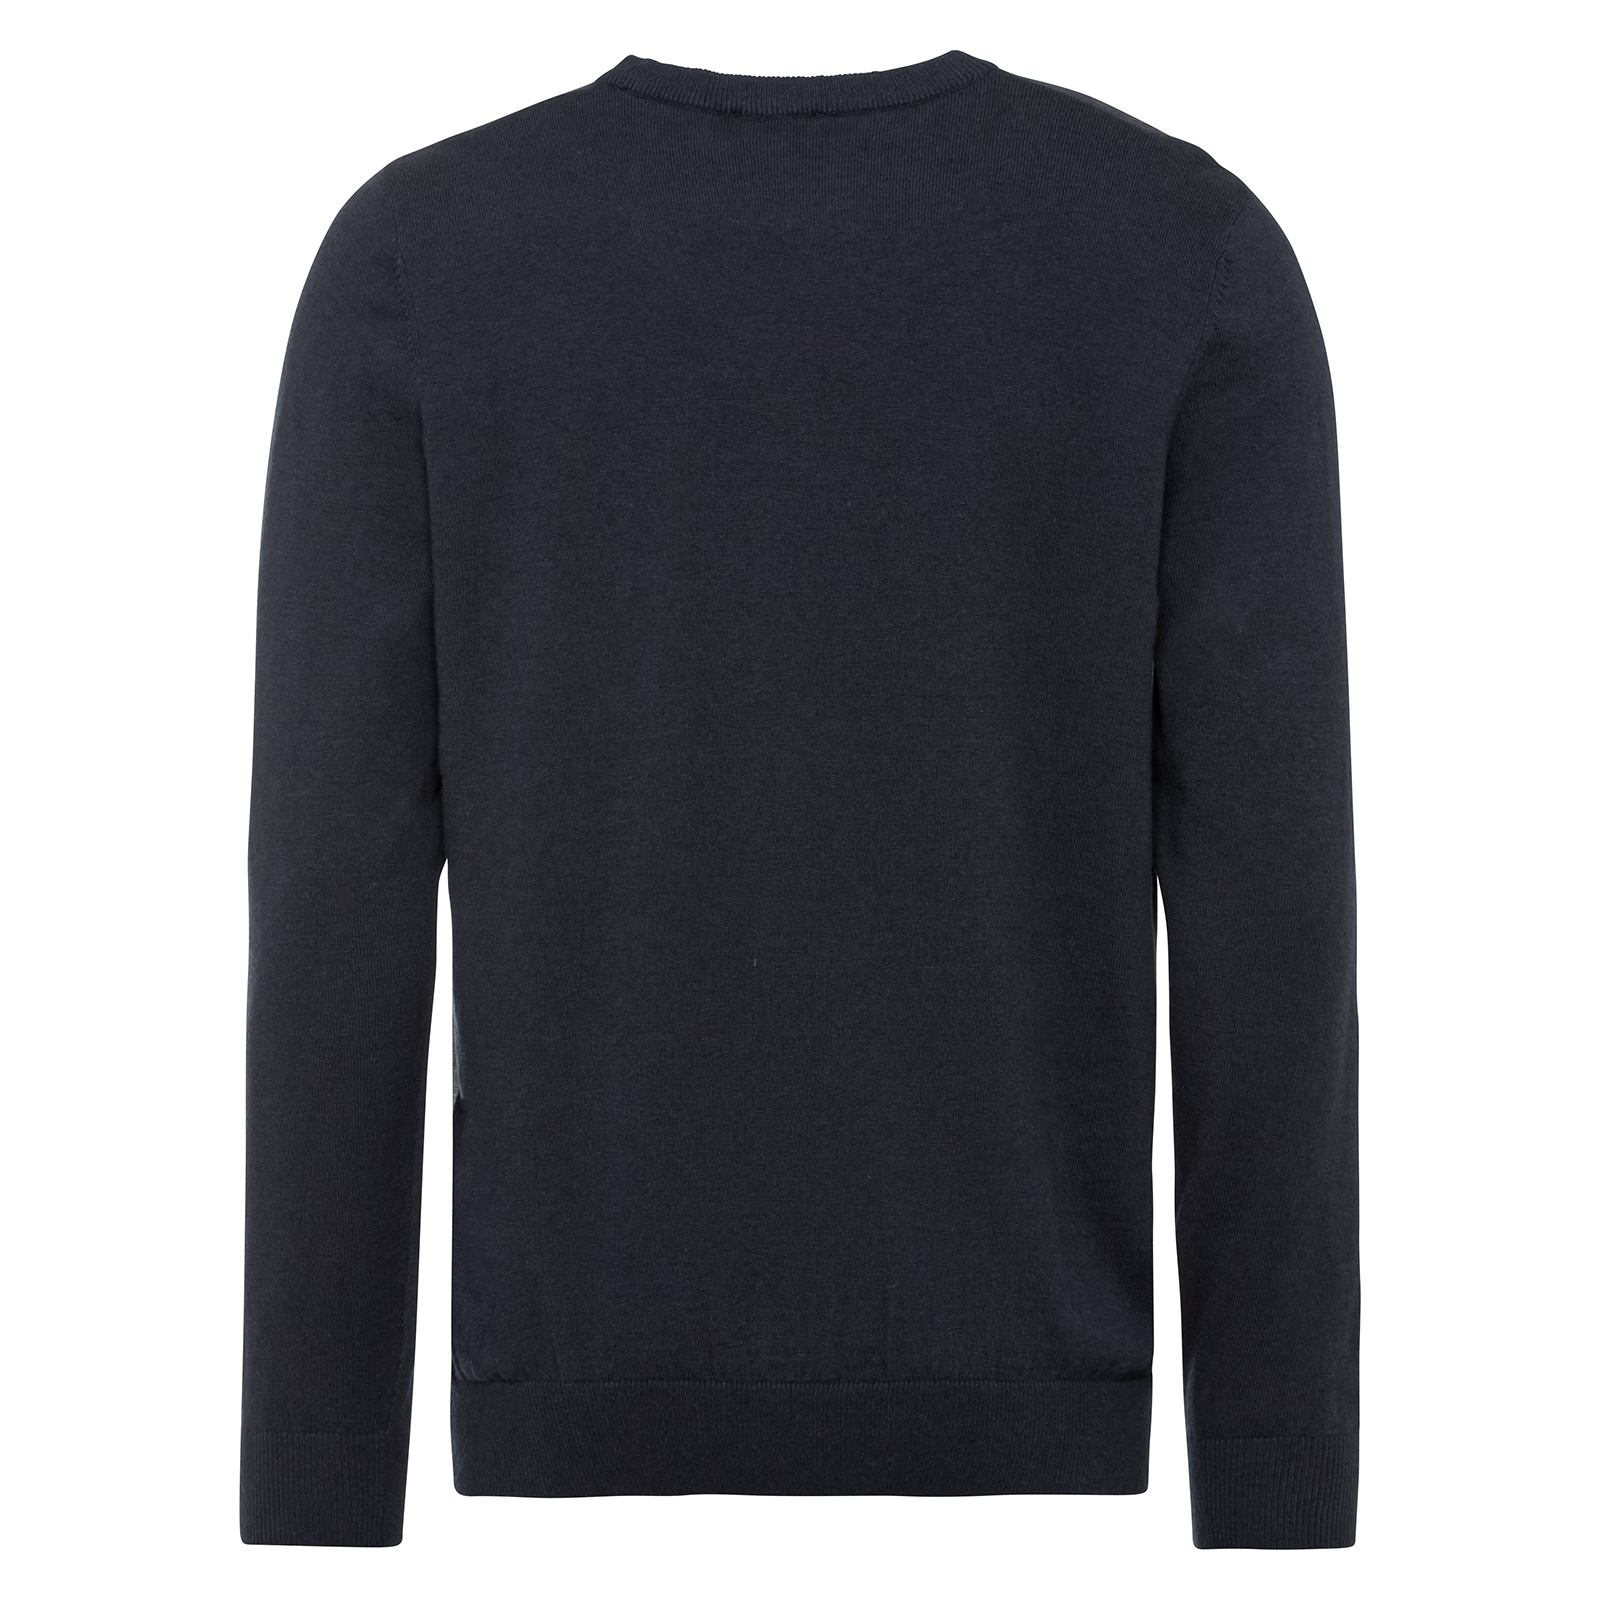 Pull-over chaud pour hommes